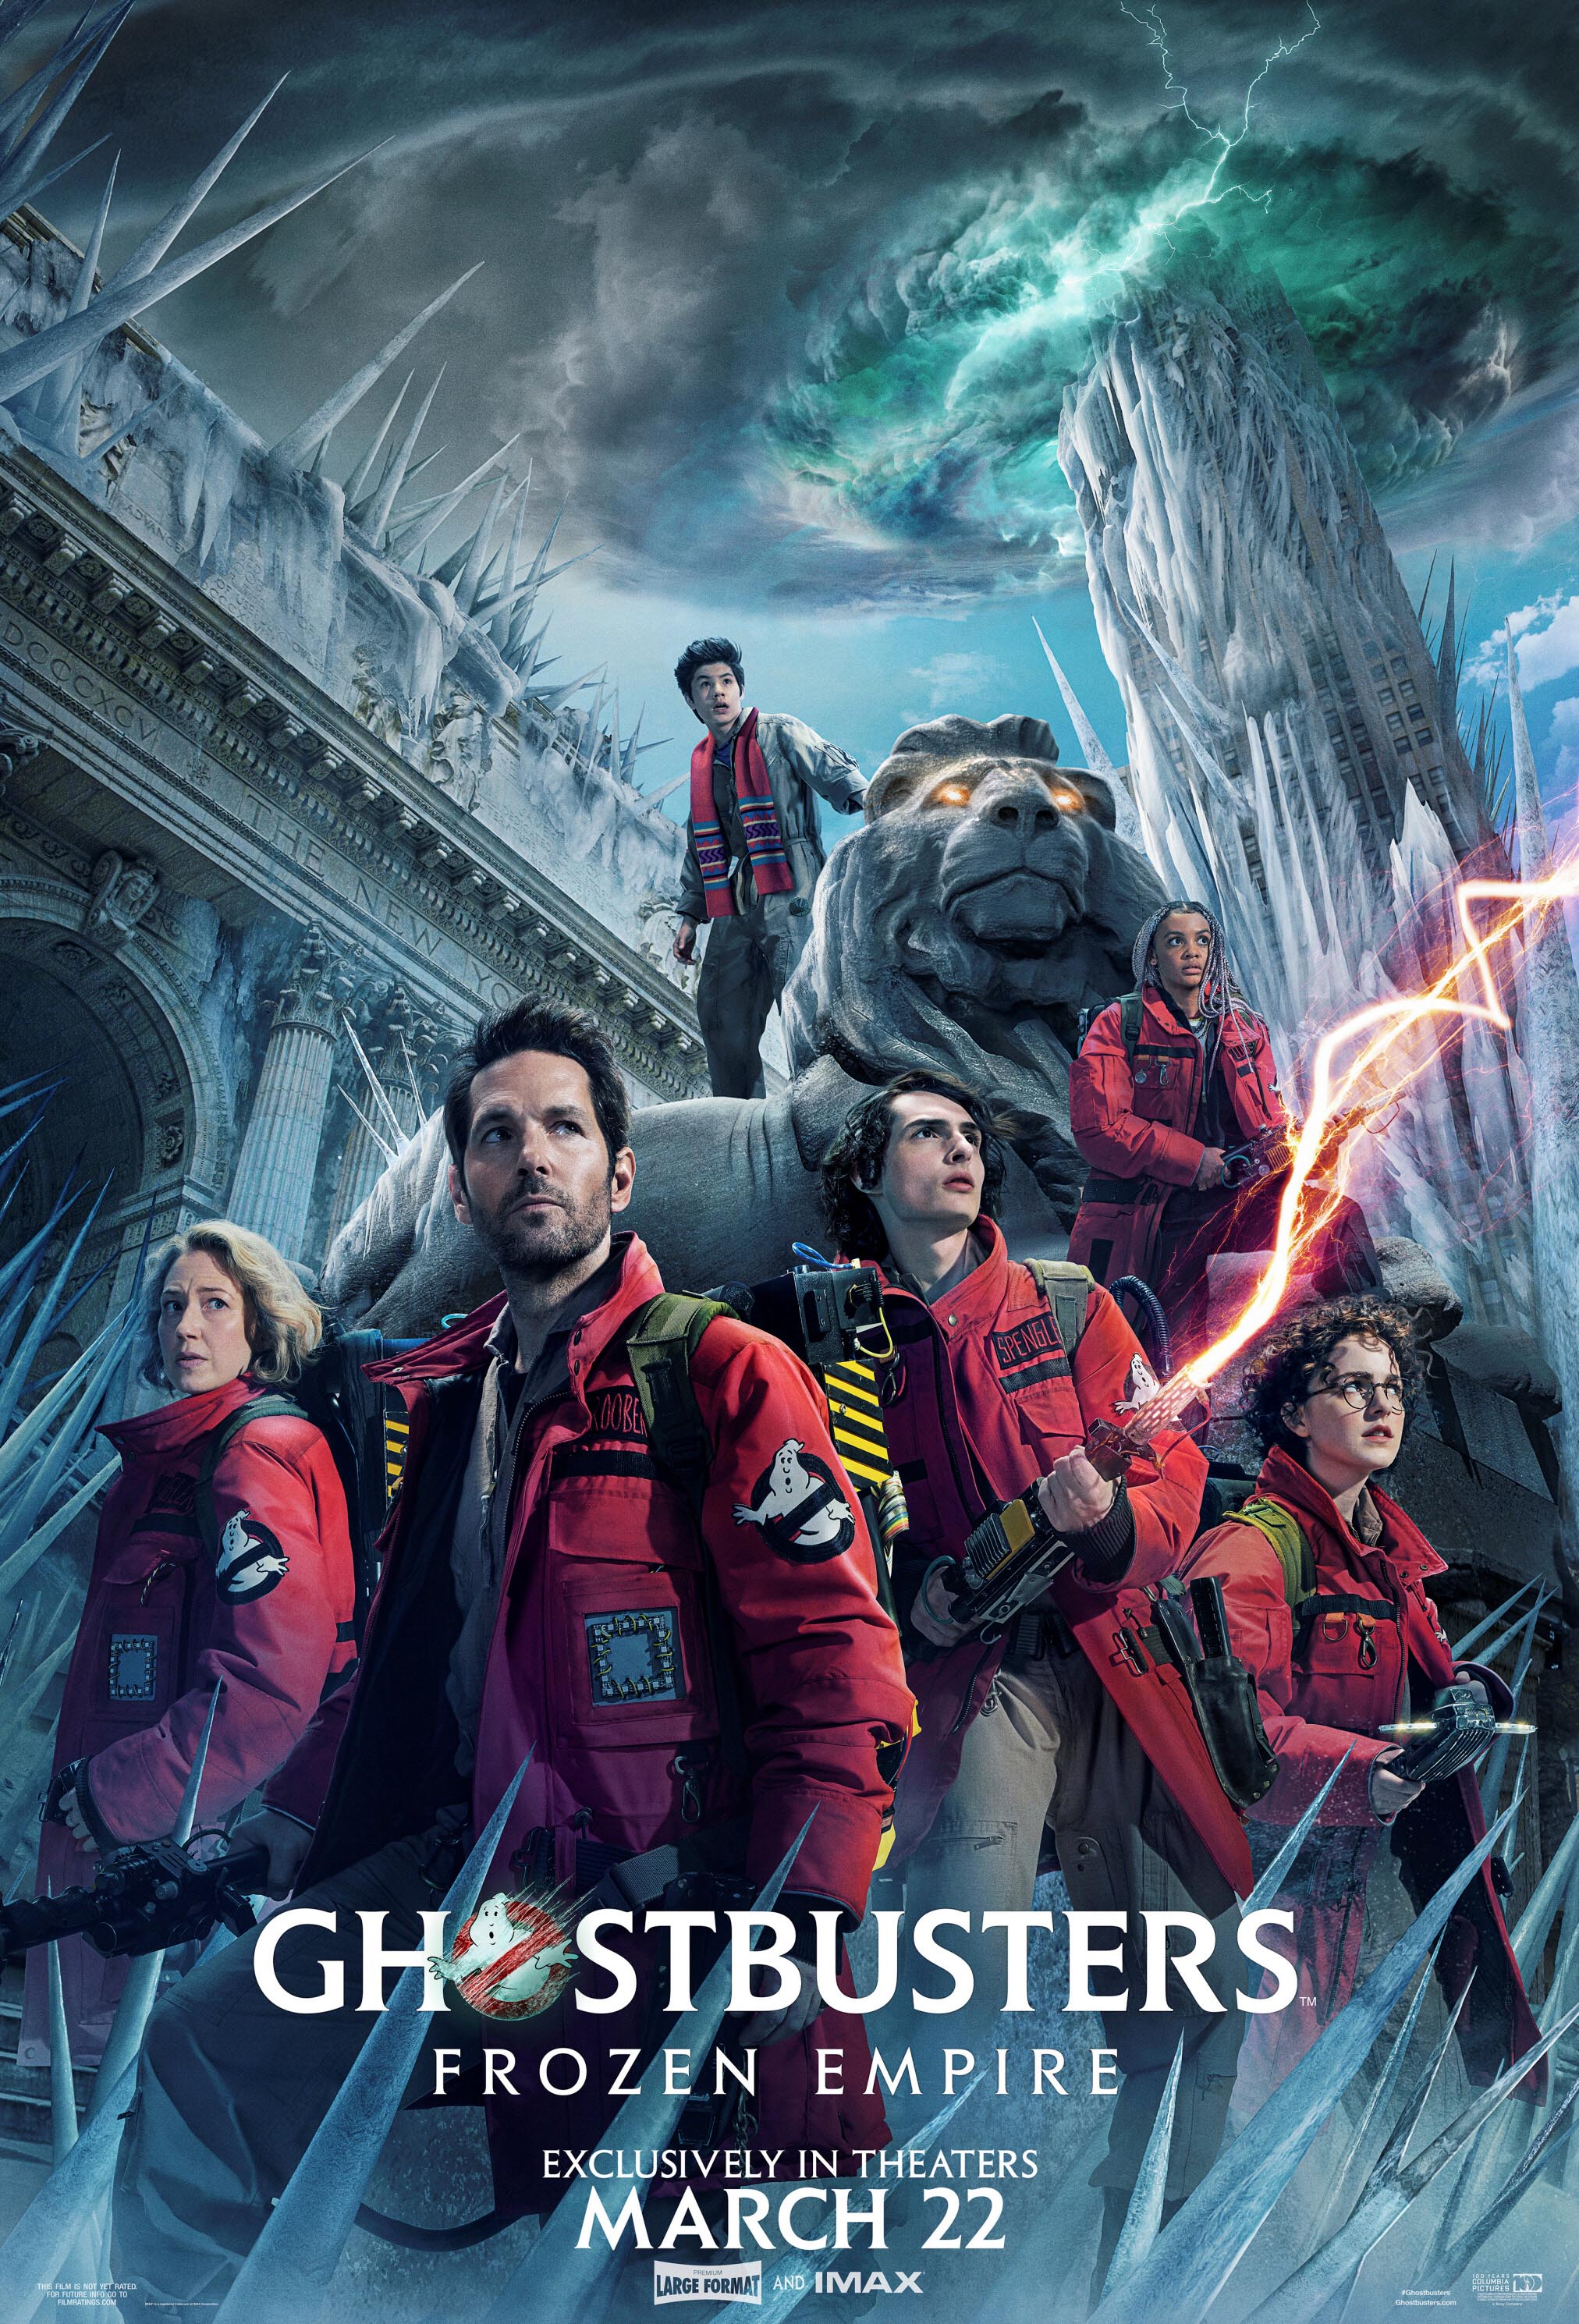 <p>"Ghostbusters: Frozen Empire" -- the fifth Ghostbusters movie and third sequel to <a href="https://www.wonderwall.com/entertainment/movies/ghostbusters-cast-where-are-they-now-actors-actresses-3019870.gallery">the original 1984 supernatural comedy</a> – is the worst installment in the long-running film franchise yet… including the much-maligned 2016 all-female reboot (which we actually loved). The 2024 flick -- which centers around the young heroes from 2021's "Ghostbusters: Afterlife" (Finn Wolfhard and Mckenna Grace) as they reestablish the Ghostbusters in New York City with adults played by Paul Rudd and Carrie Coon -- scored a 43% rotten rating with critics on Rotten Tomatoes but banked more than $160M at the box office on a hefty budget of $100M.</p>